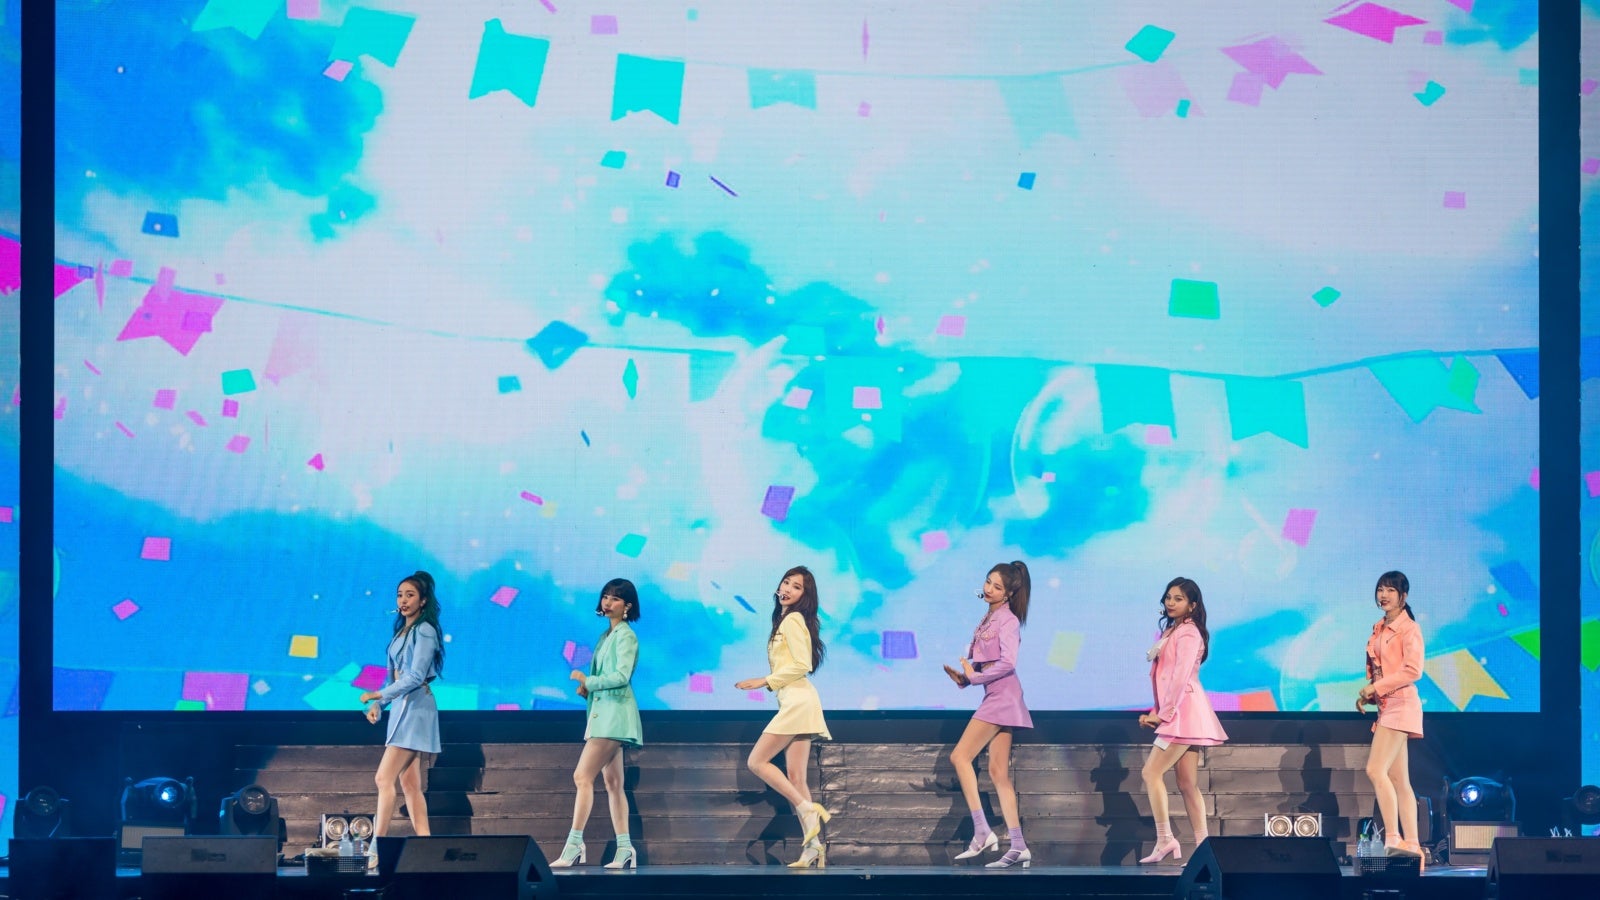 &Quot;Baby Sayang, Saya Suka Kamu,&Quot; Gfriend Wows Malaysian Fans With Bm Phrases During Their Concert - World Of Buzz